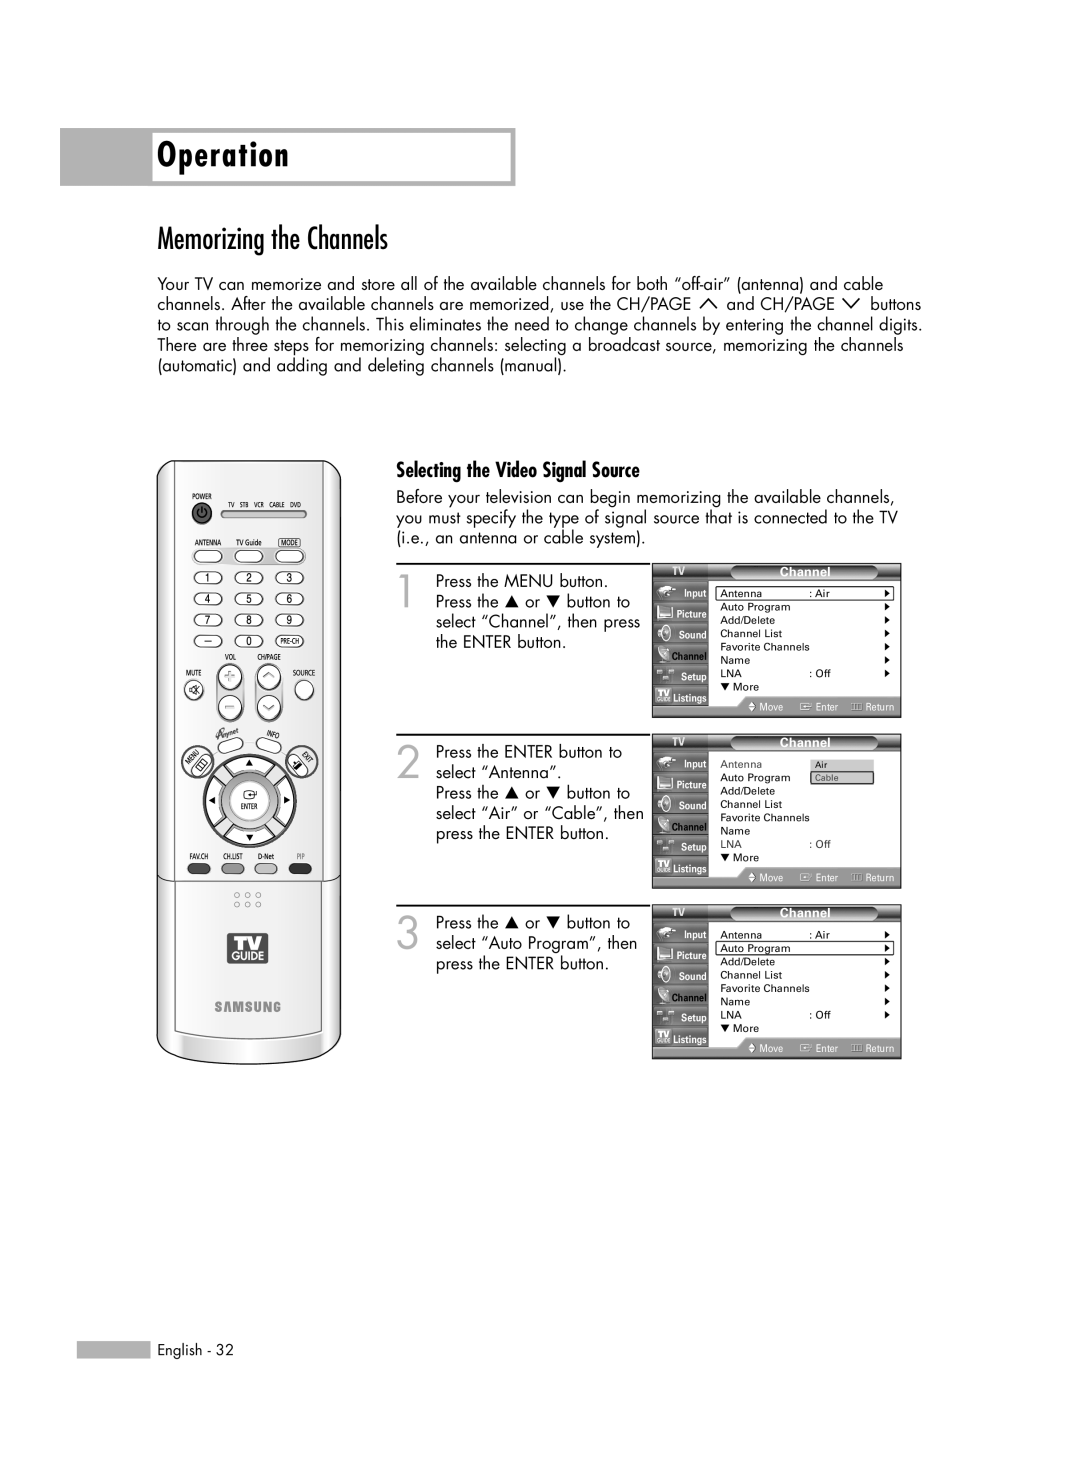 Samsung HL-R5688W manual Memorizing the Channels, Selecting the Video Signal Source, Operation 